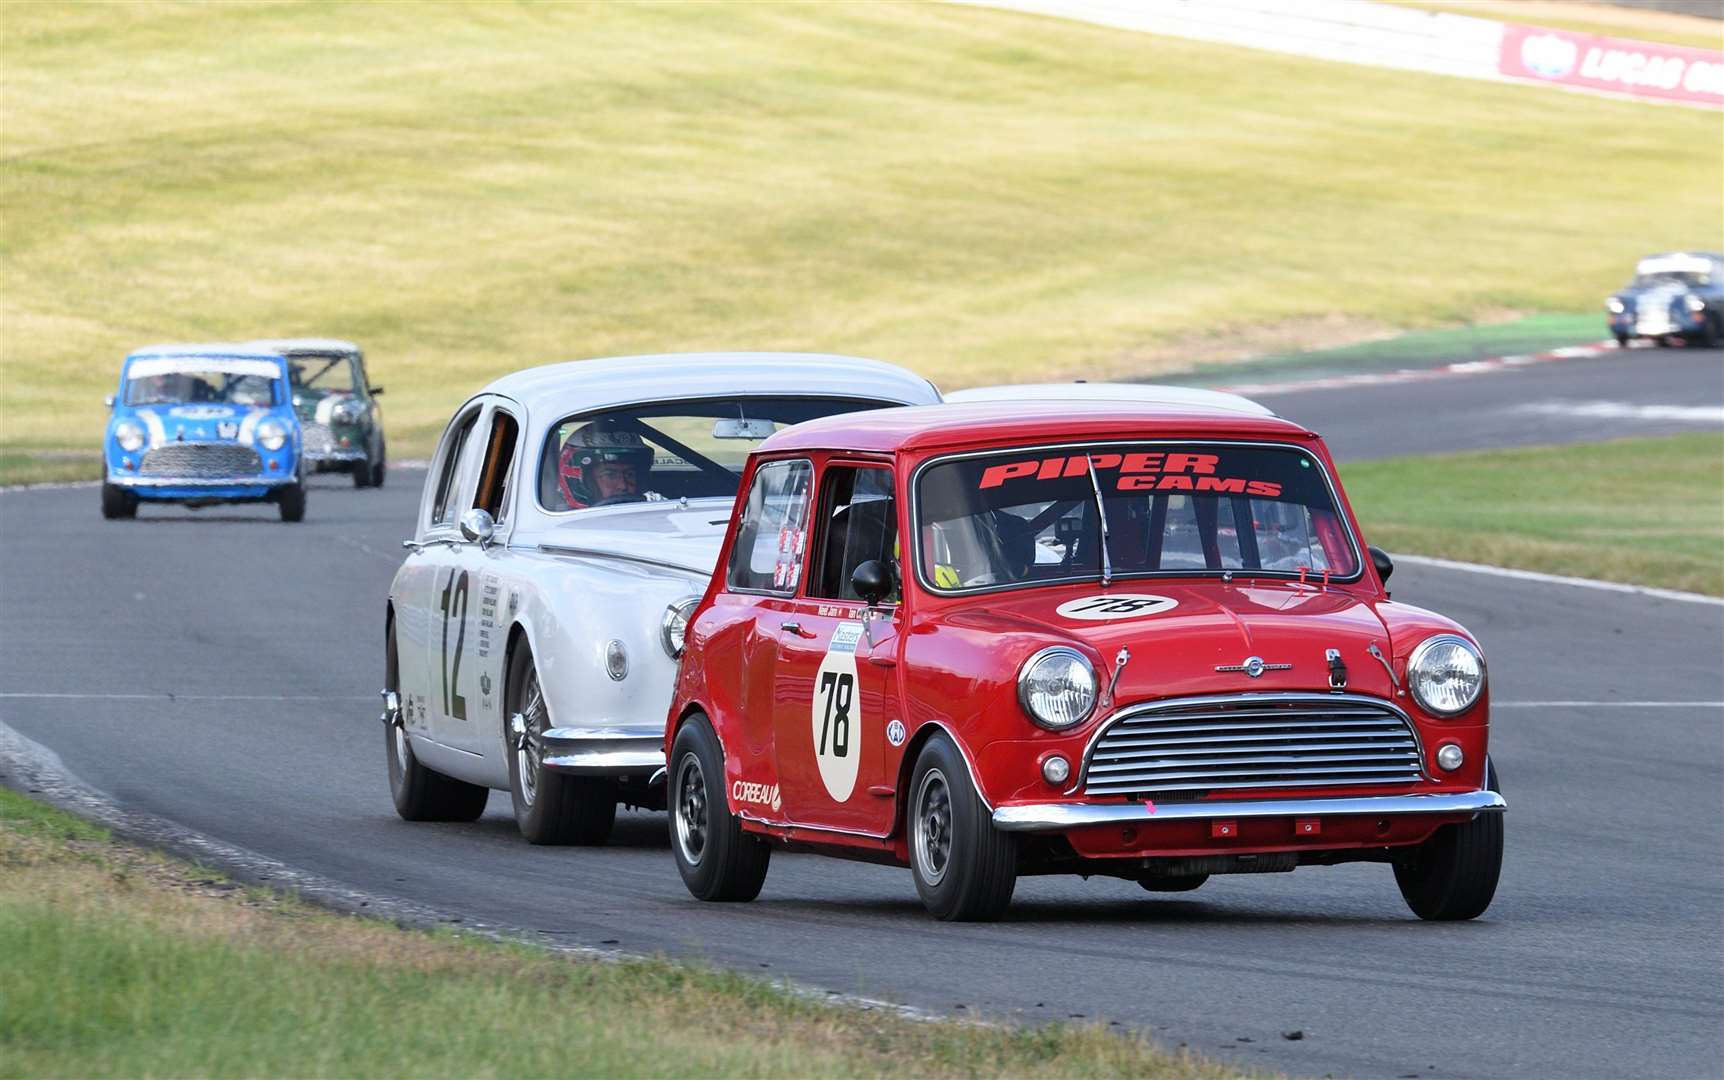 Yalding’s Ian Curley enjoyed some great battles with Grant Williams (Jaguar Mk1) in the Pre-66 races, twice finishing second overall. Picture: Simon Hildrew